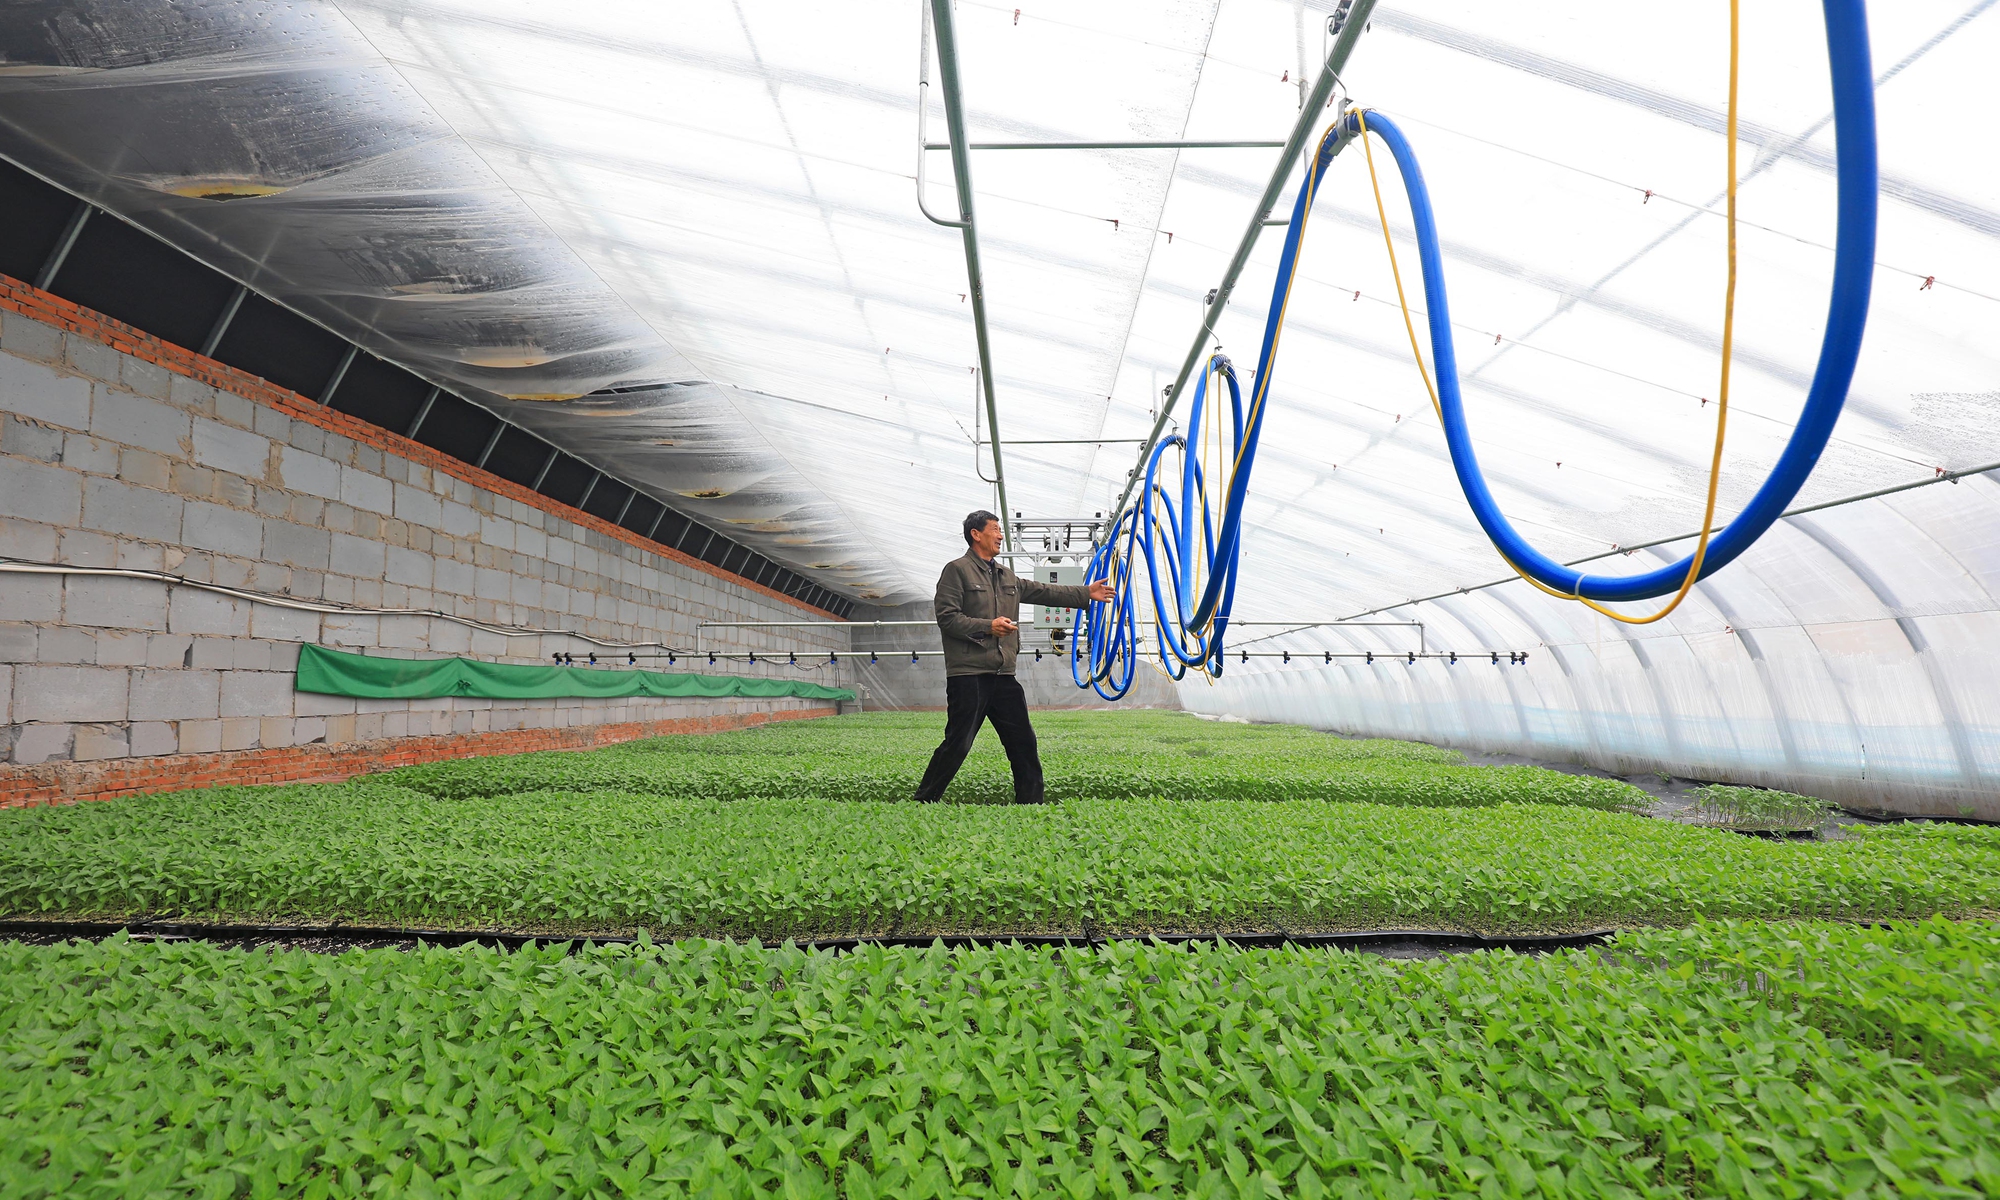 A farmer adjusts equipment in a smart greenhouse in Tangshan, North China's Hebei Province on Tuesday. The greenhouse is used for breeding vegetable seedlings. Photo: VCG